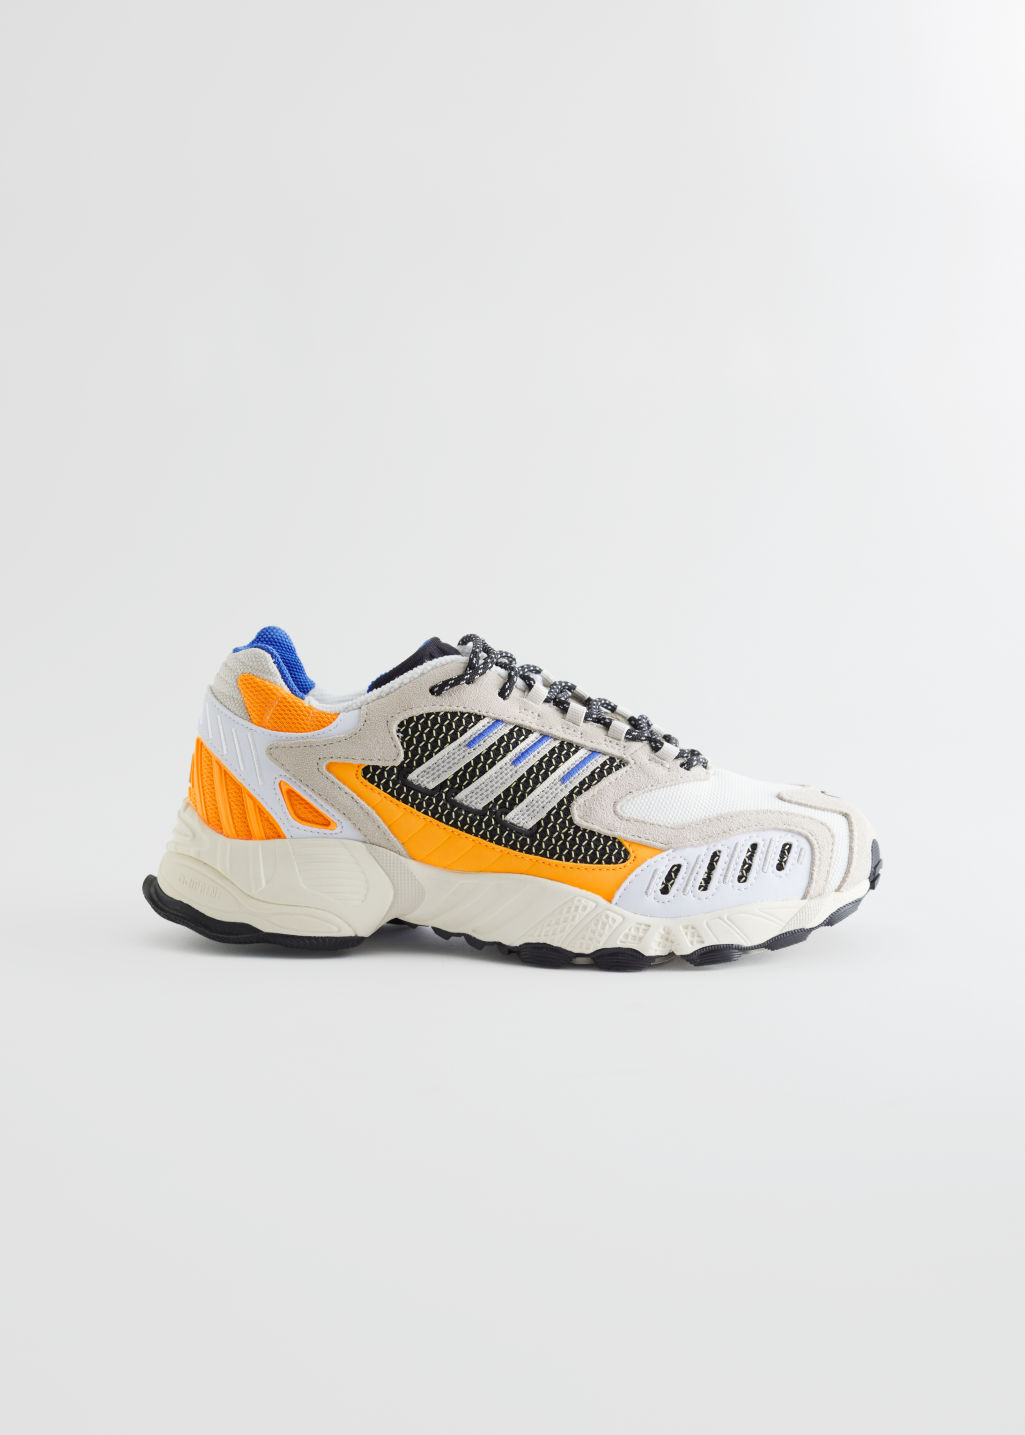 adidas Torsion TRDC - Yellow, Grey - Adidas - & Other Stories - Click Image to Close